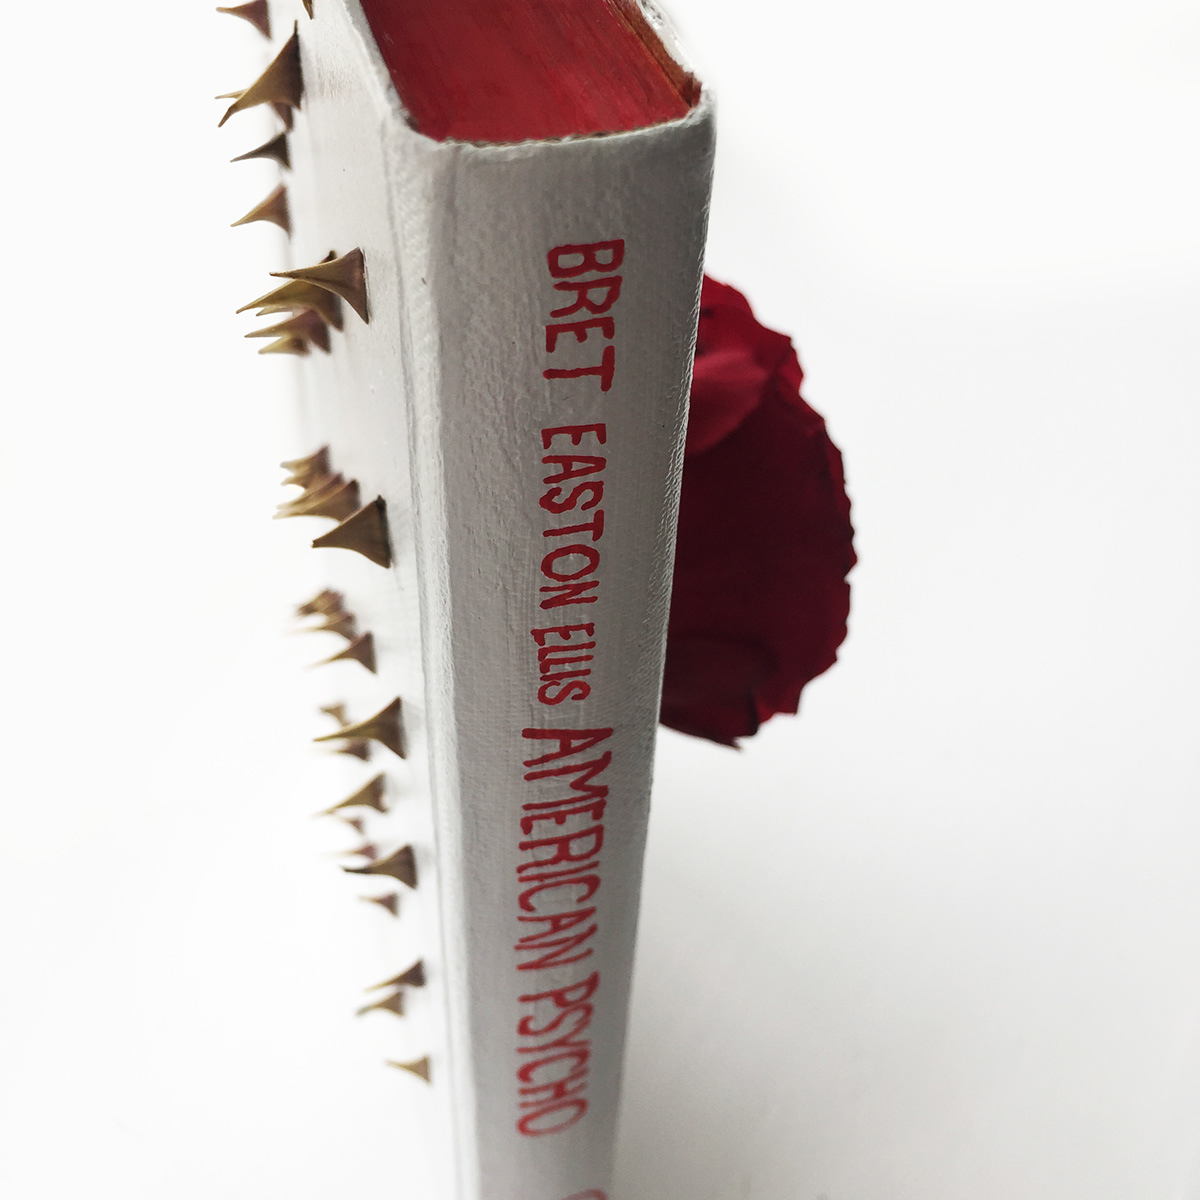 American Psycho book cover craft analog red White rose Thorn Love